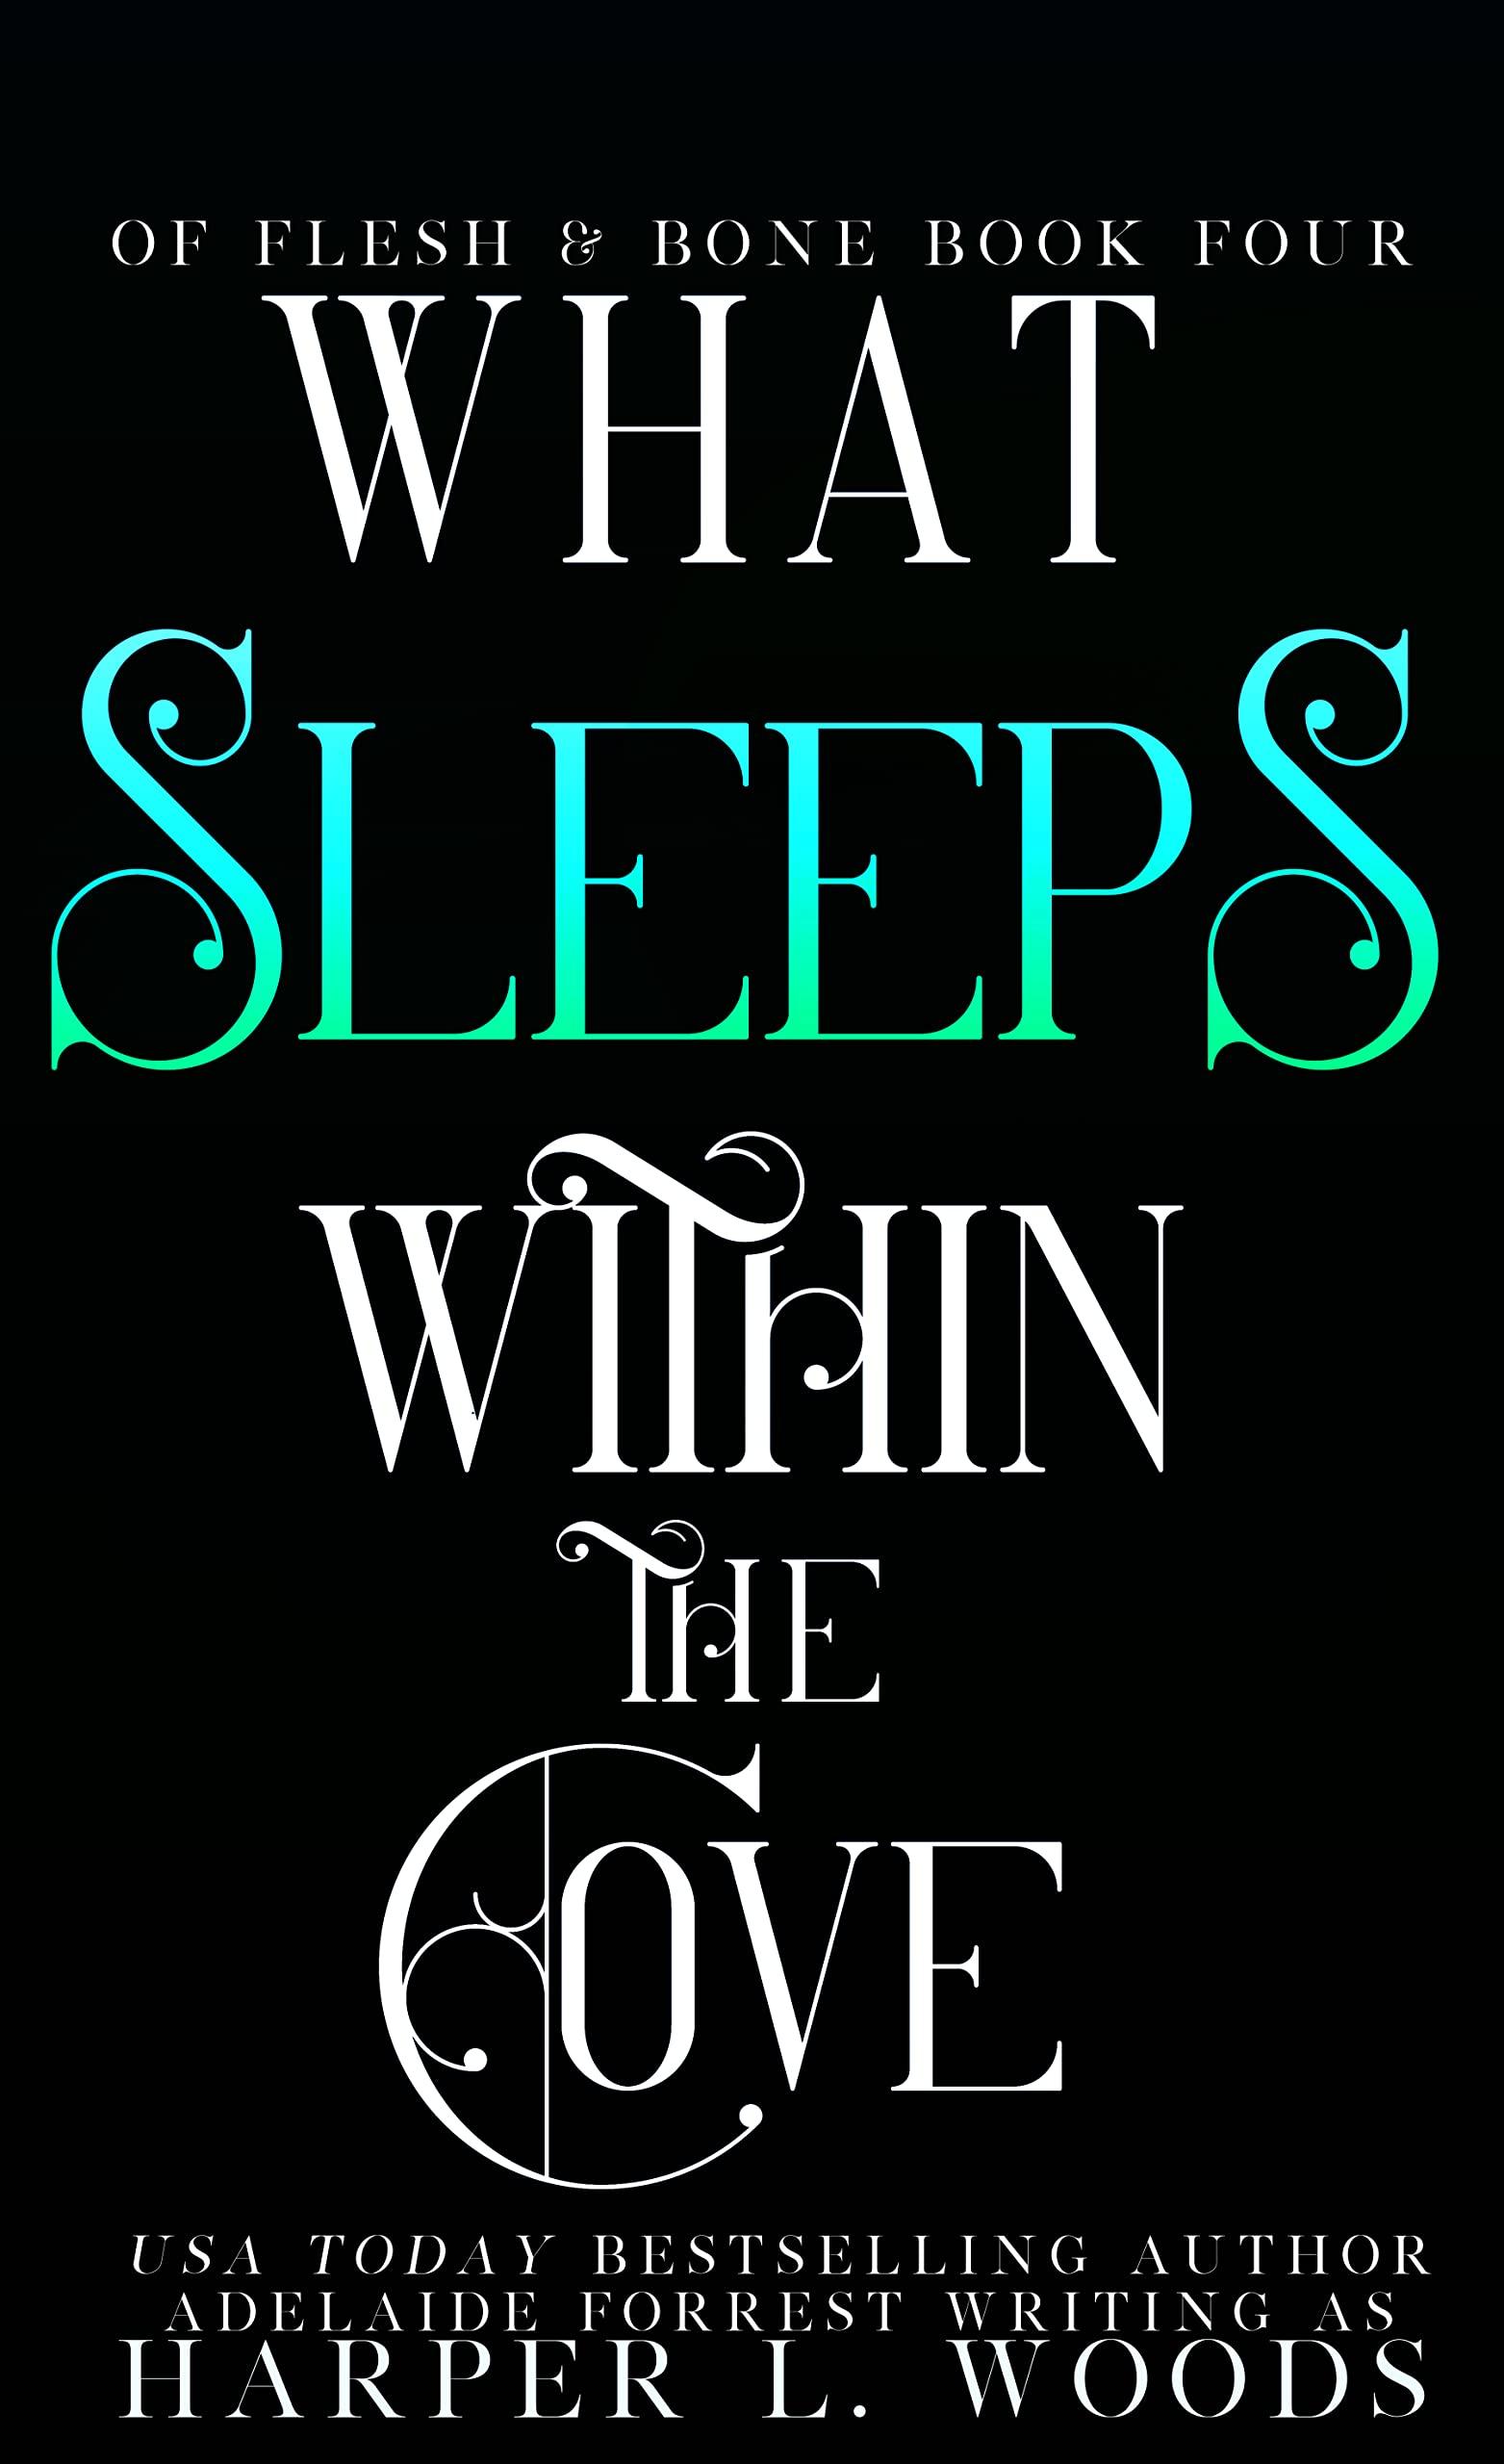 What Sleeps Within the Cove